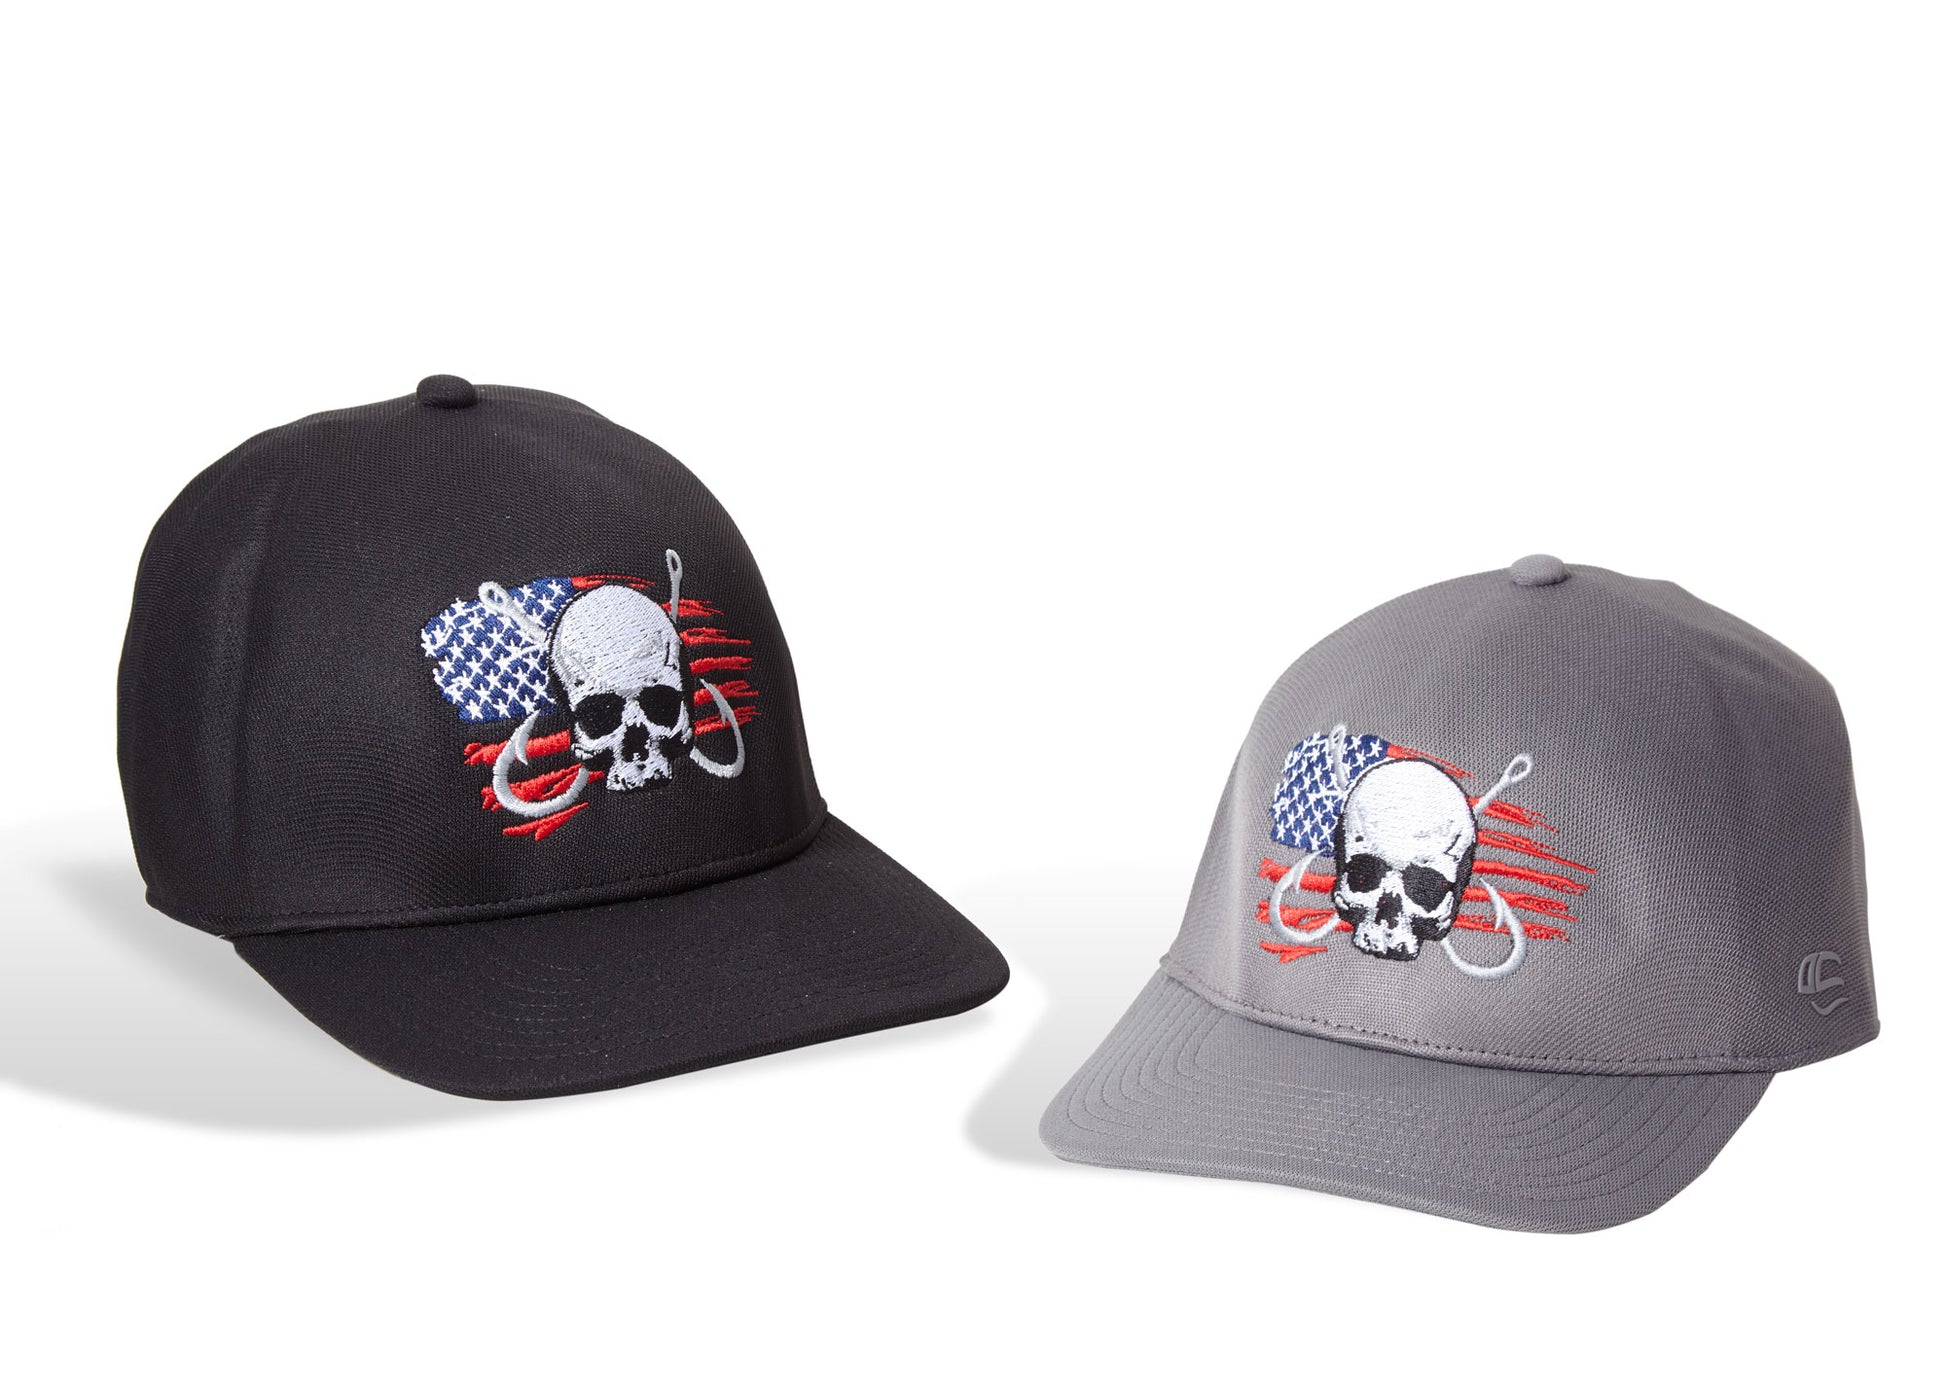 dead fish hook black cap and grey cap featuring embroidered skull and hooks logo over american flag 